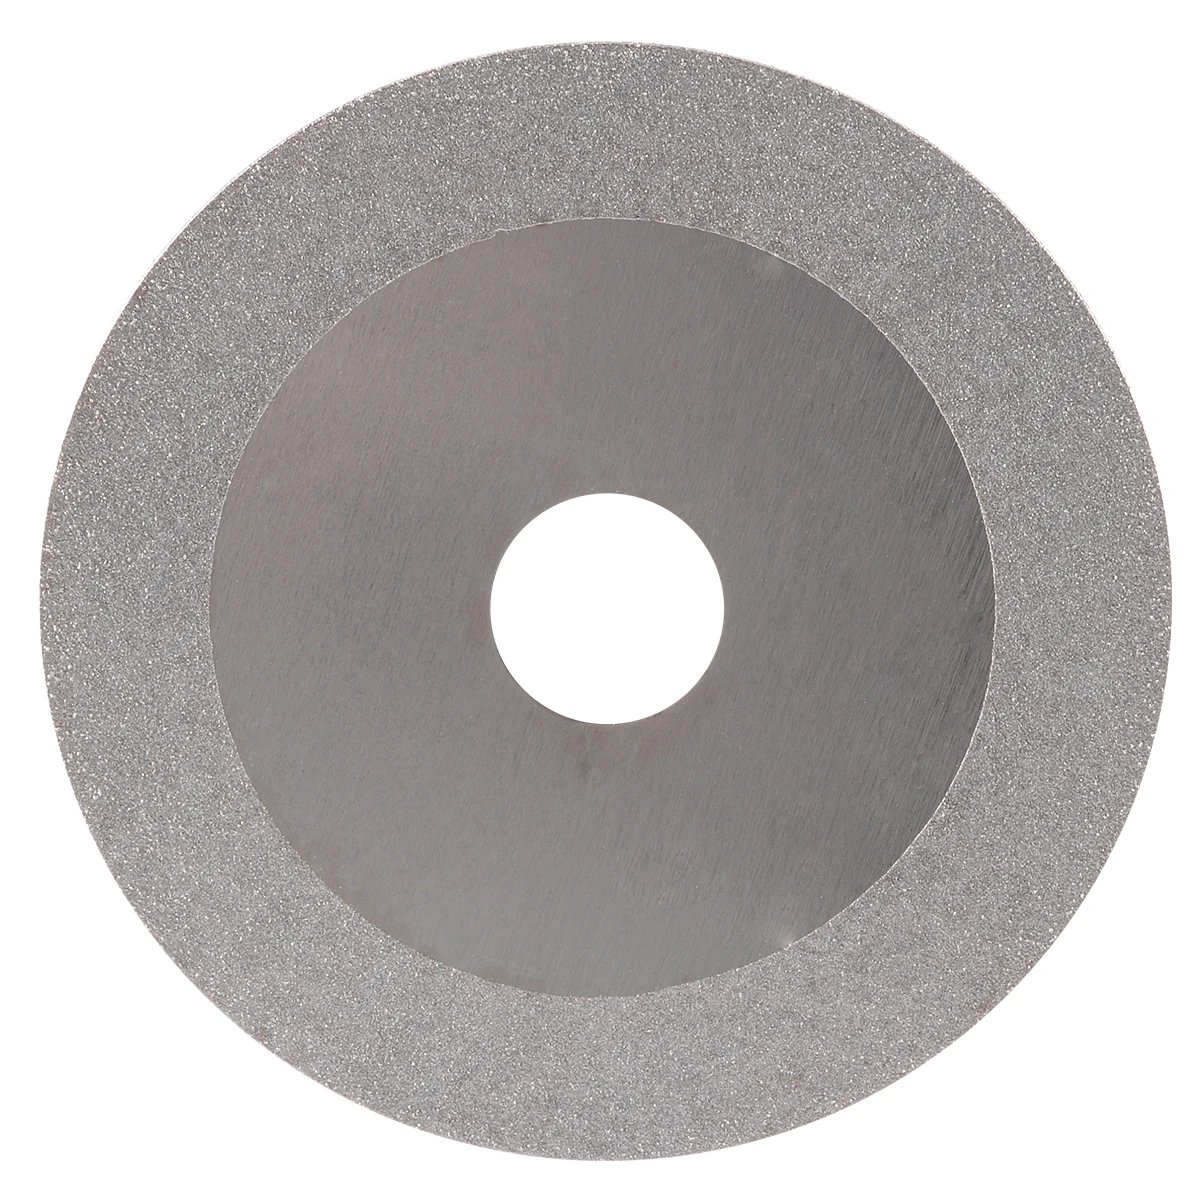 

1pc Diamond Coated Grinding Wheel Disc Carbide Angle Grinder Cutting Wheel Blade Tool for Grind Stone Glass Grinding 100*20mm